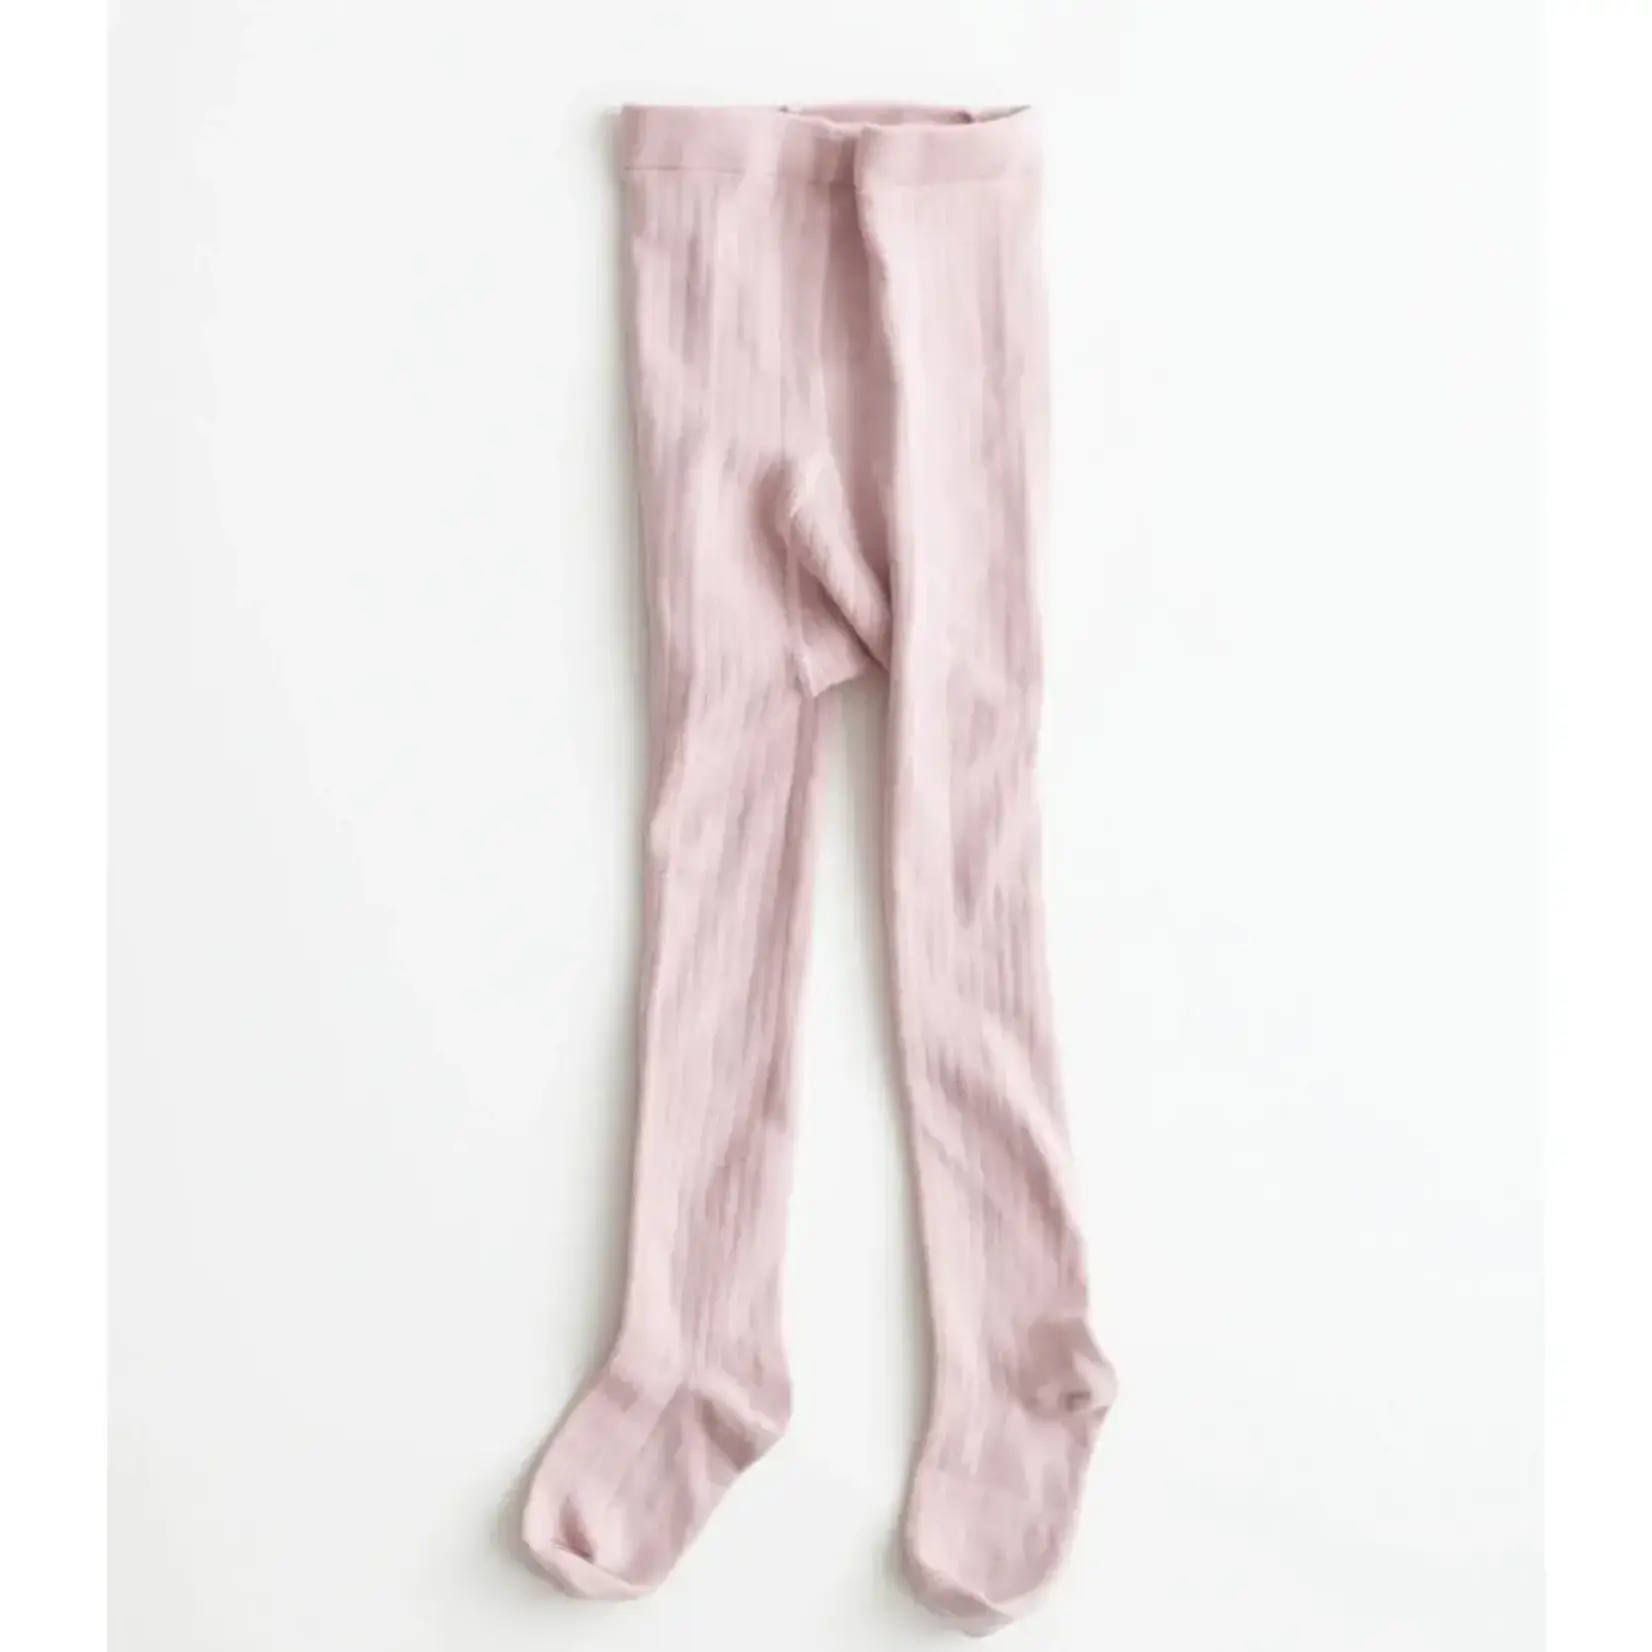 Lali Cotton Tights - Pink - 4T